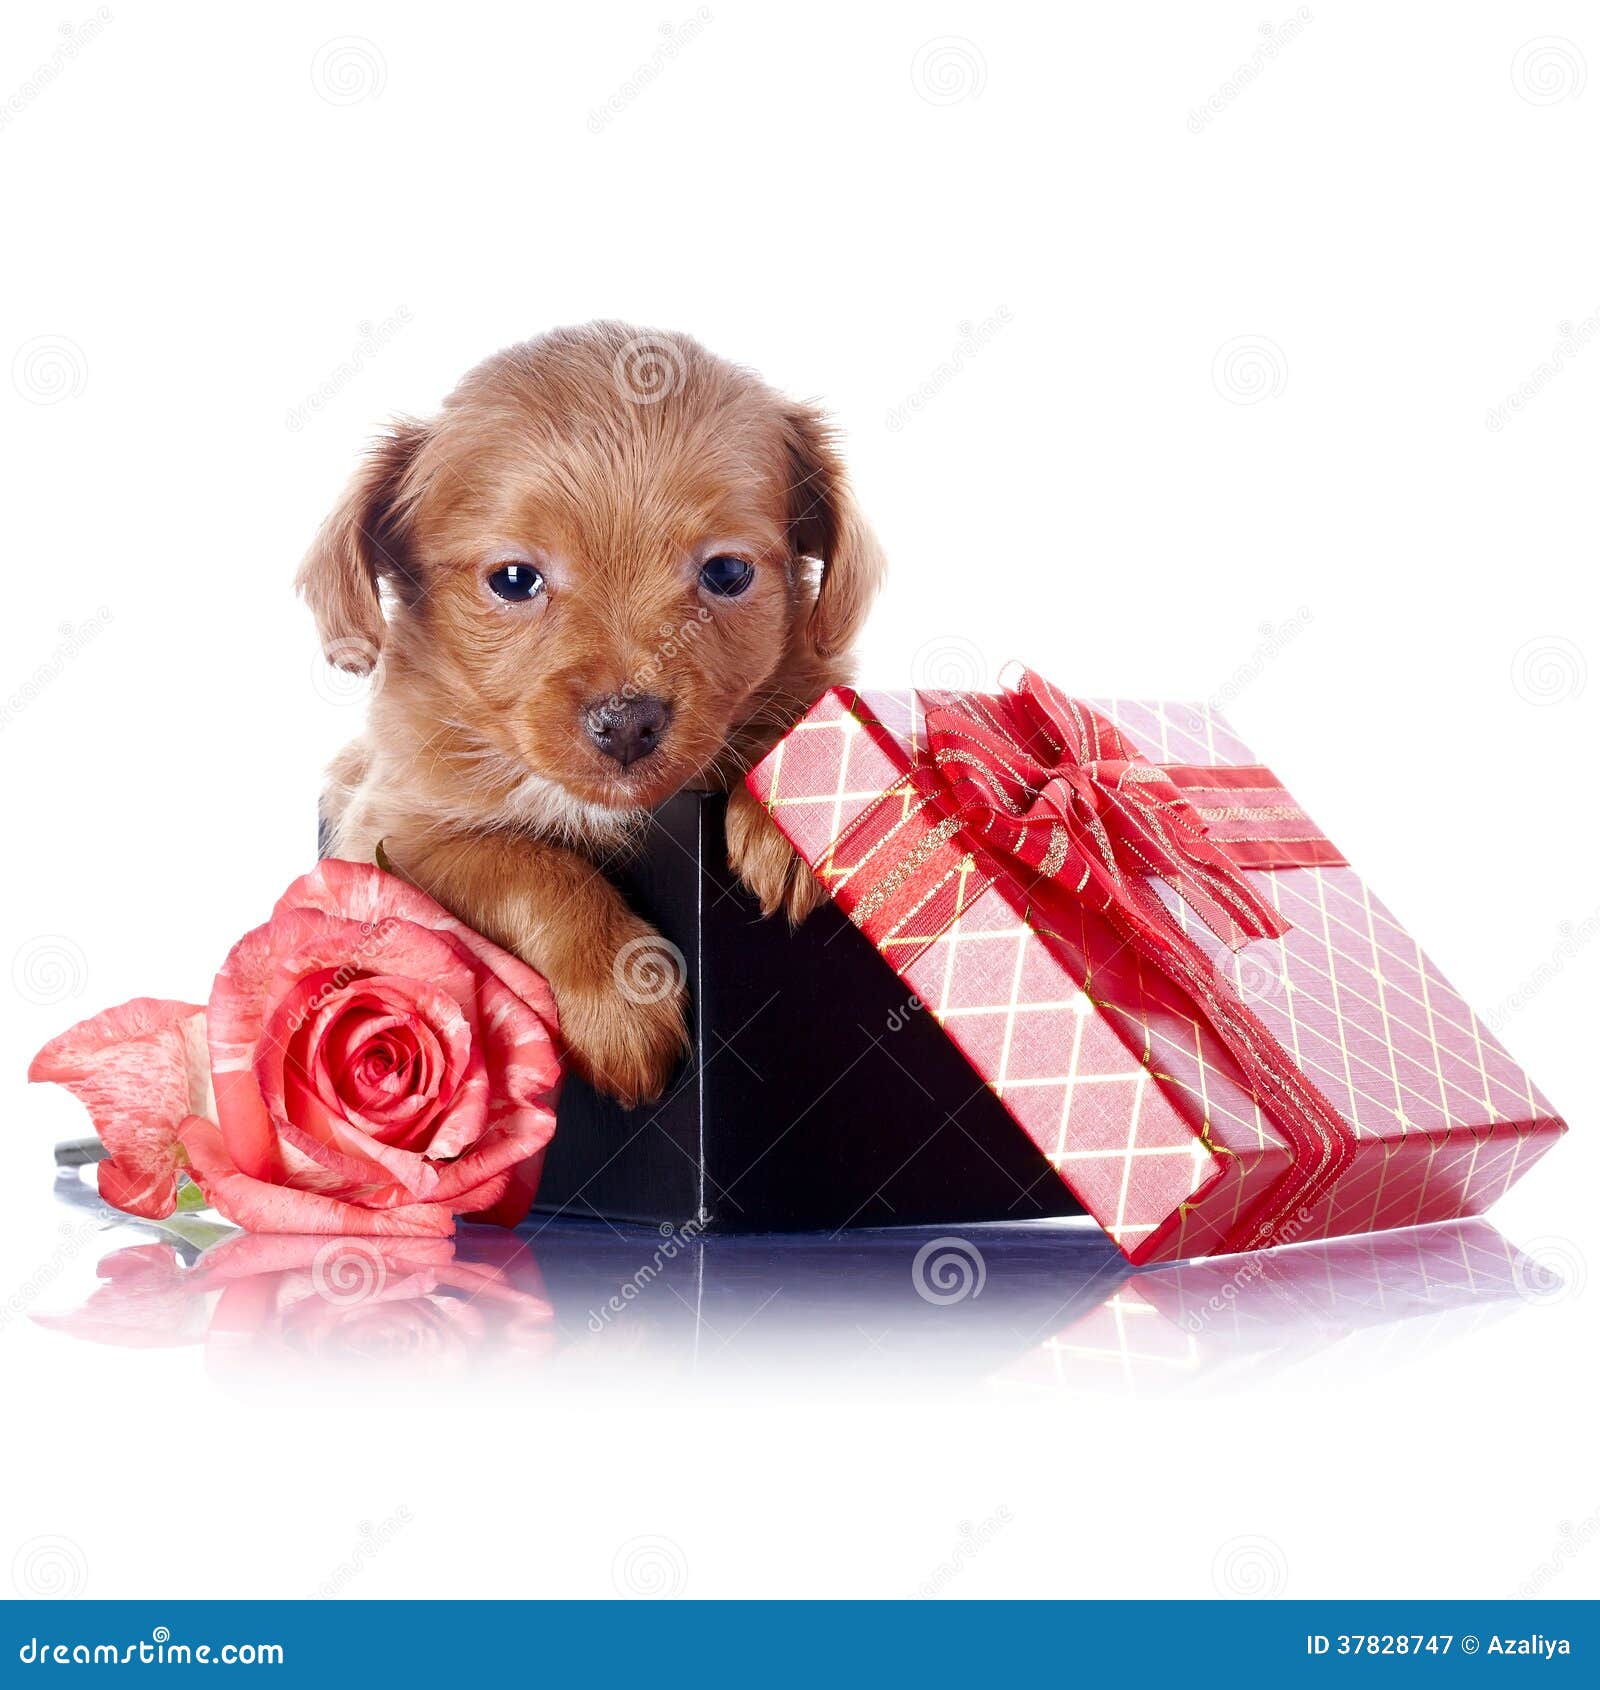 https://thumbs.dreamstime.com/z/puppy-gift-box-bow-rose-decorative-doggie-decorative-dog-petersburg-orchid-white-37828747.jpg